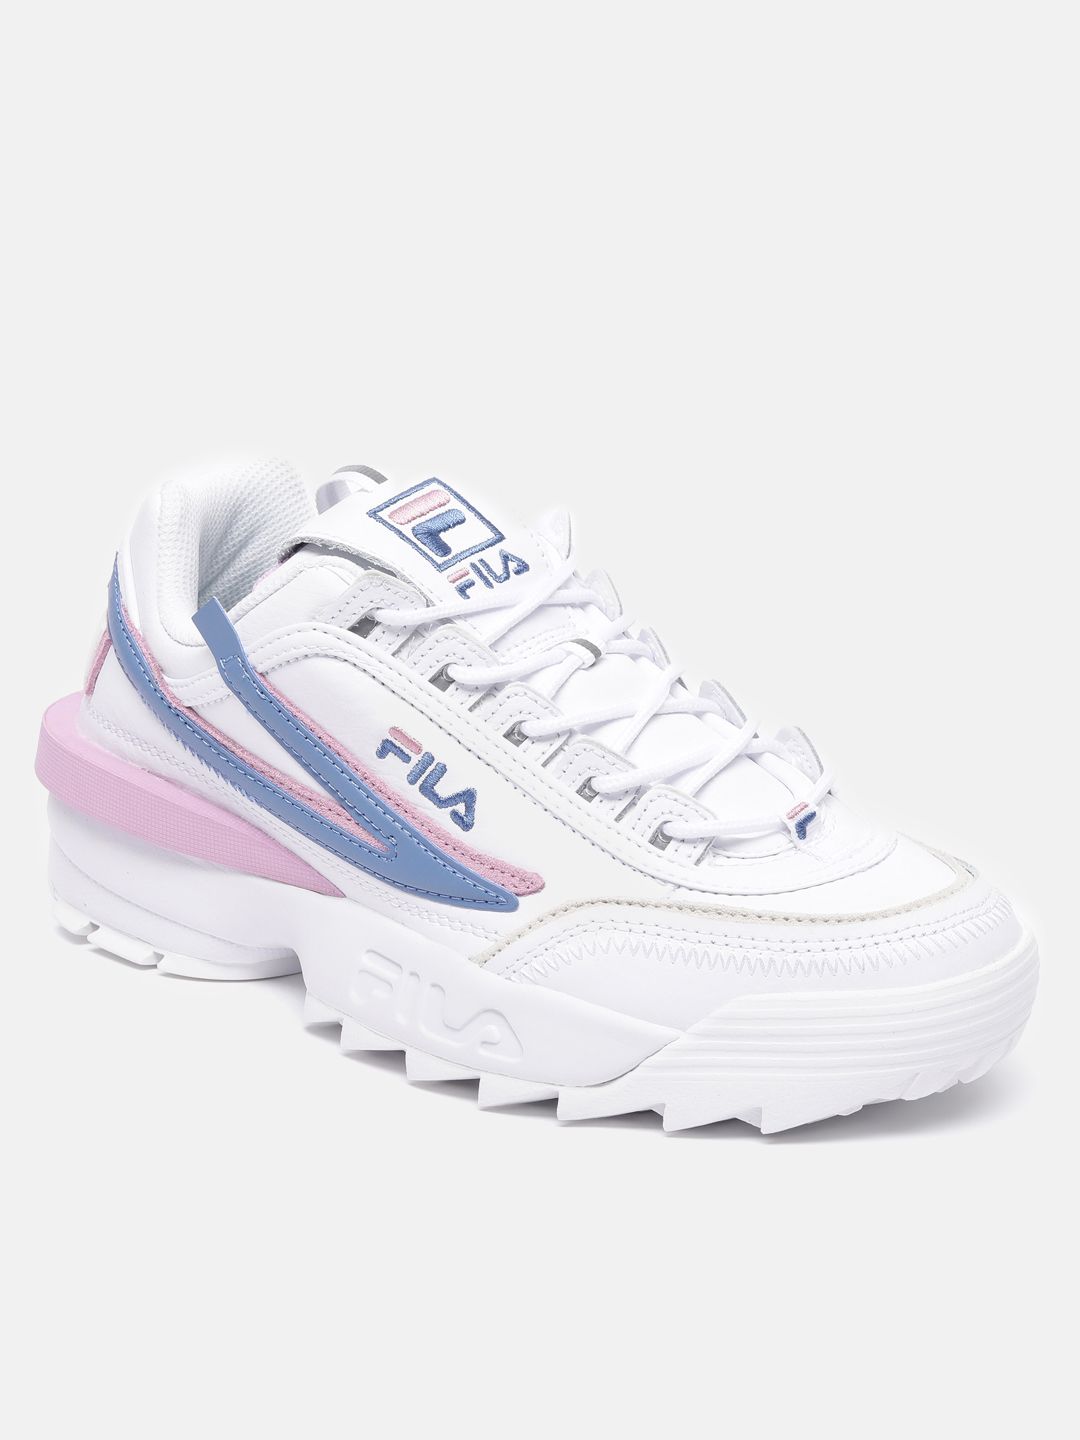 Fila Vta Blu Pea Womens Footwear - Get Best Price from Manufacturers &  Suppliers in India